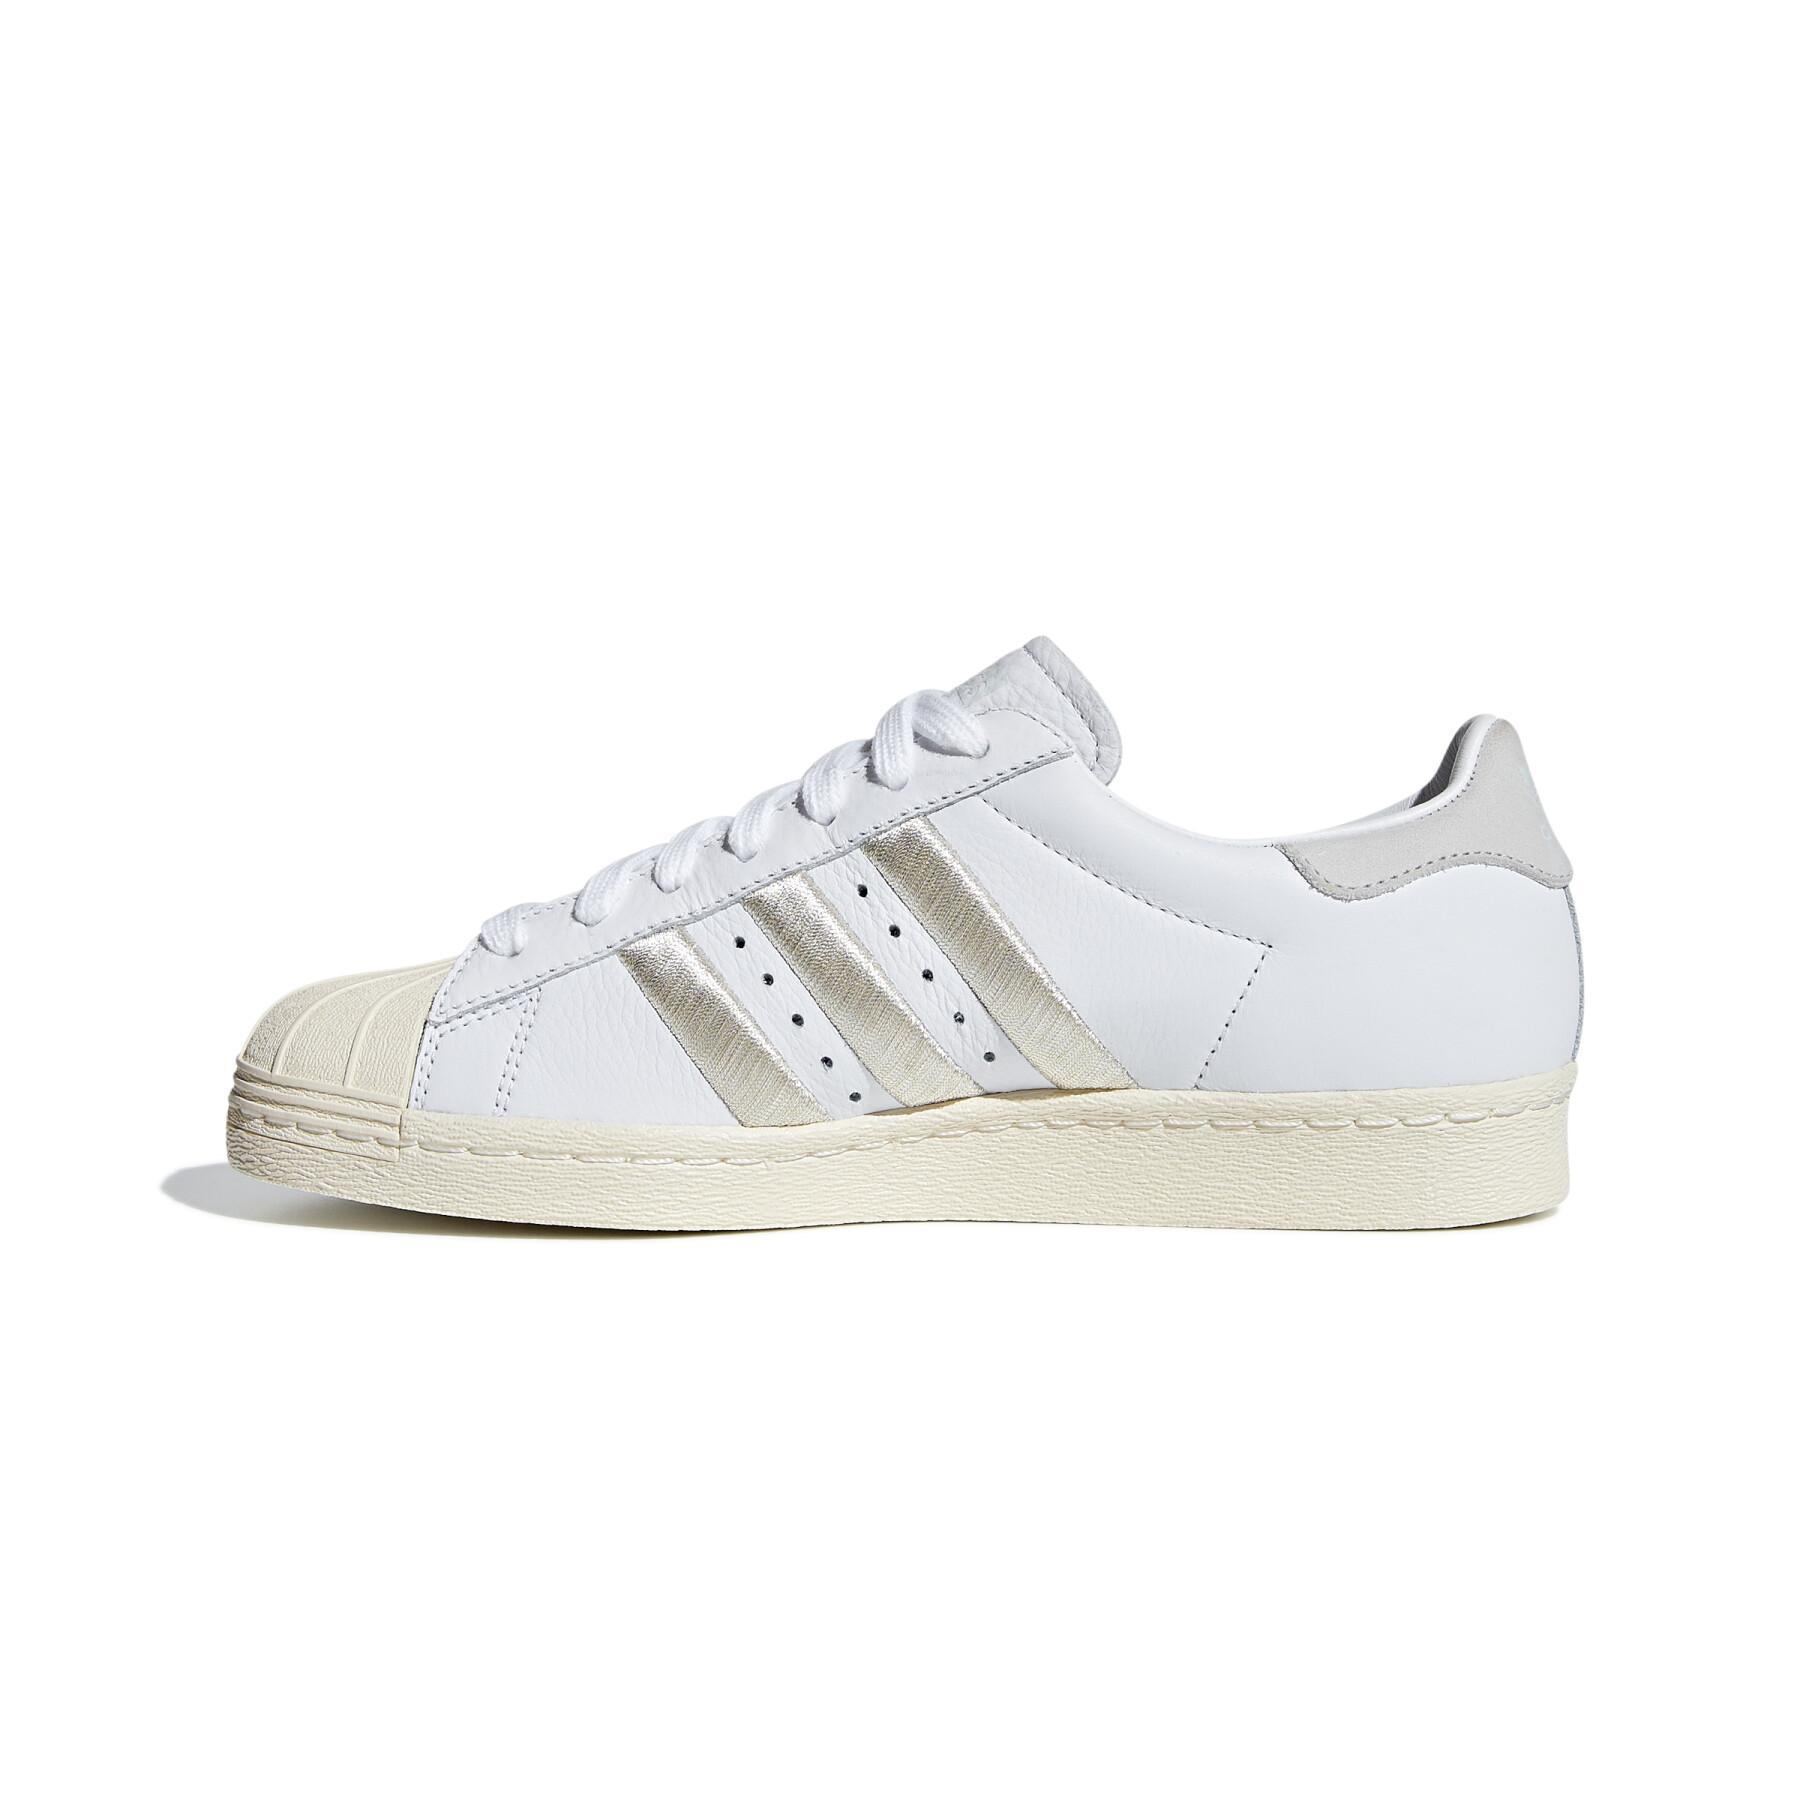 Sneakers woman Adidas Superstar 80s